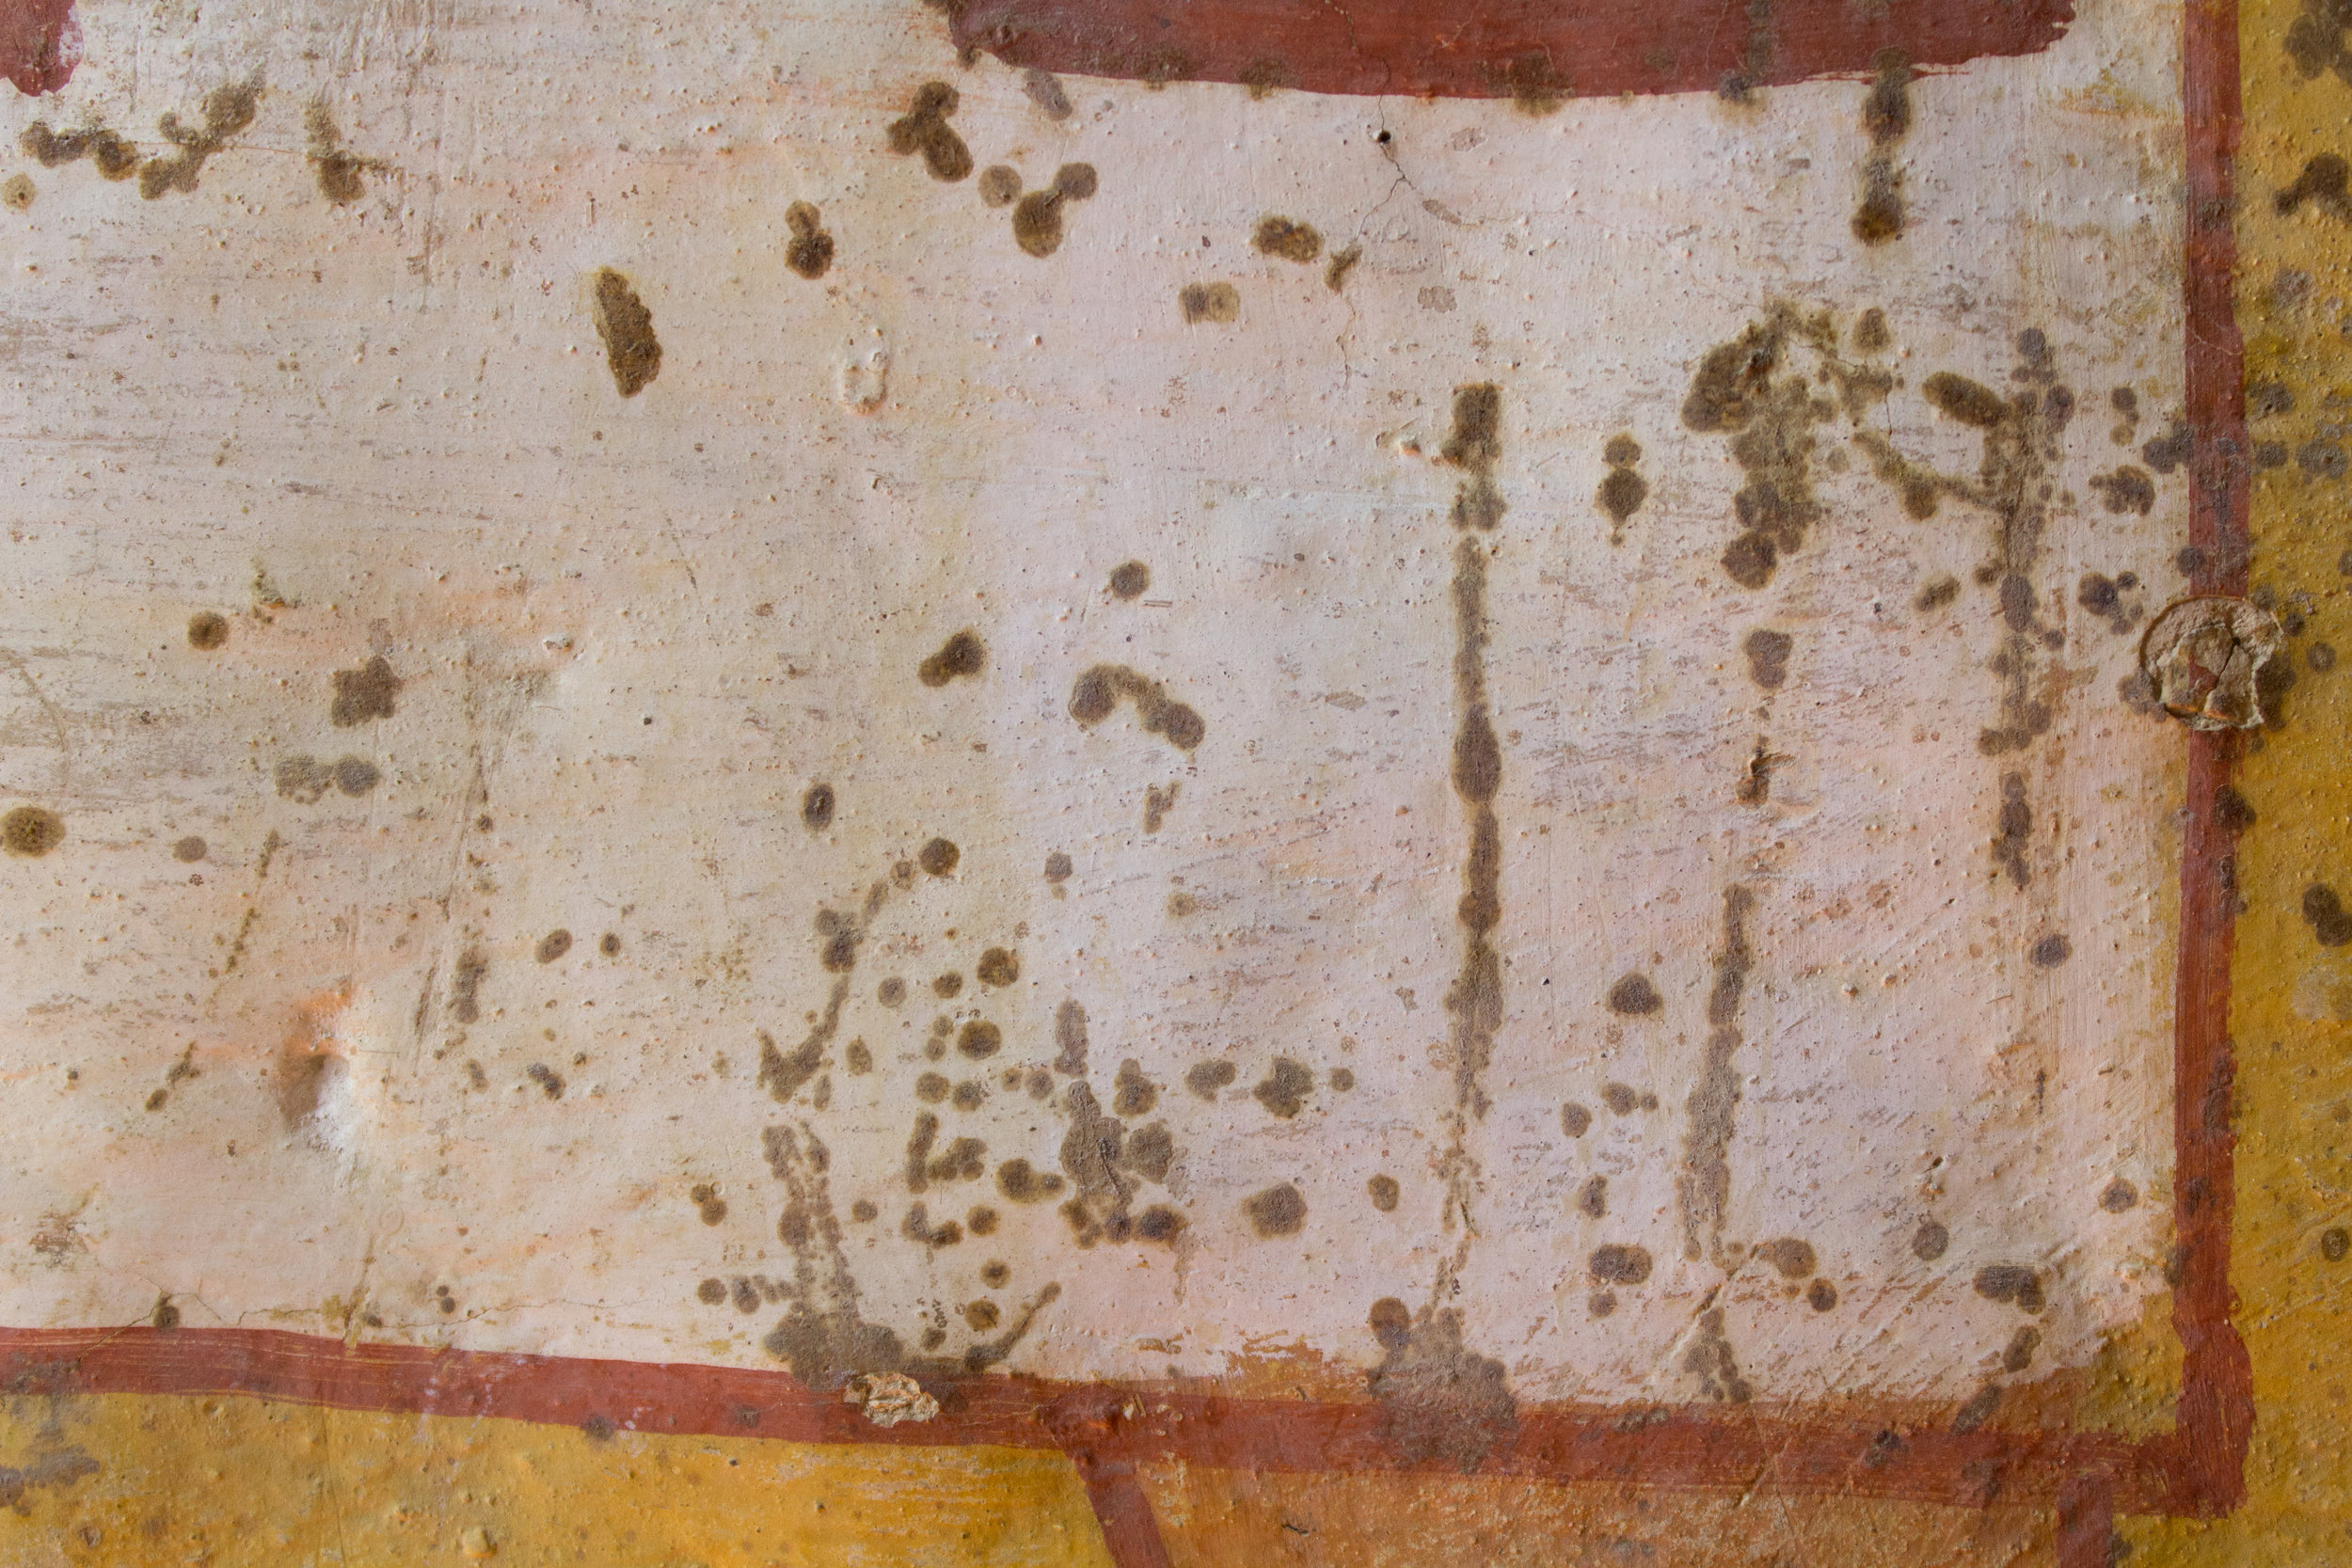  The non-original coatings had begun to deteriorate and yellow, discoloring the paintings. A yellowing coating is visible where it remains on the left side of the image as compared to where it has been removed from the right.&nbsp;  Image © J. Paul G